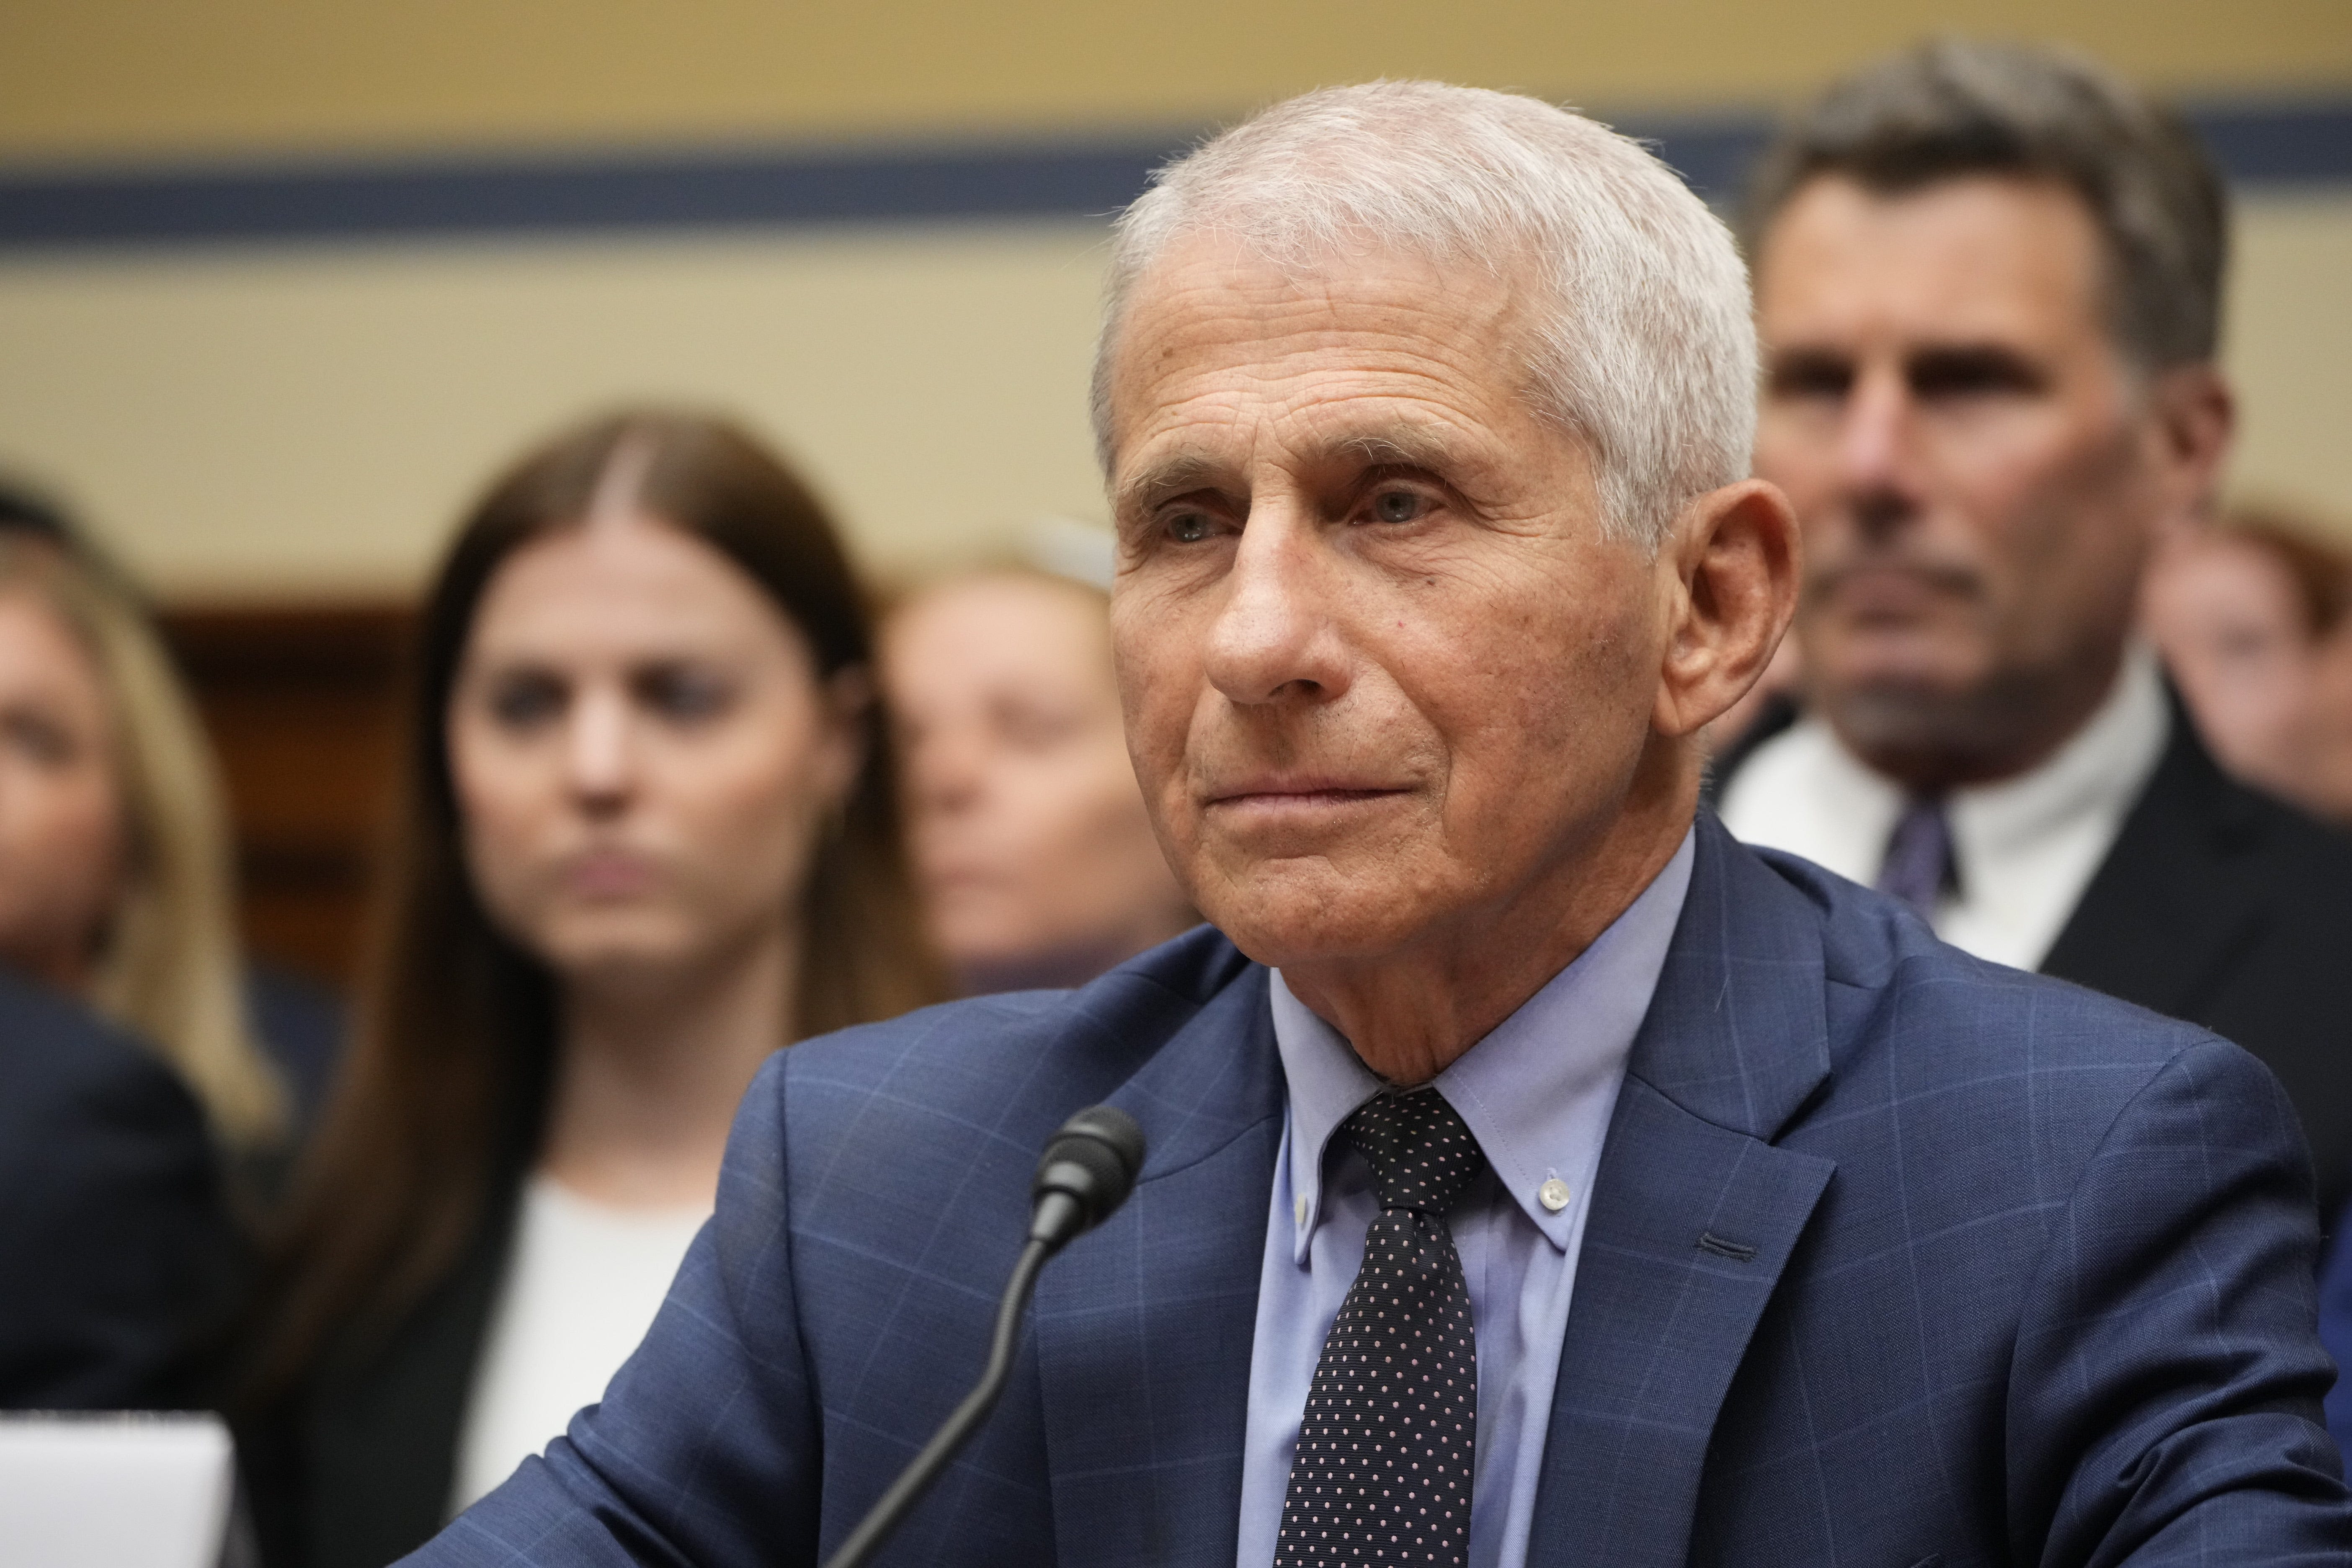 'It's like clockwork': Fauci points to MTG in 'pattern' of continued threats